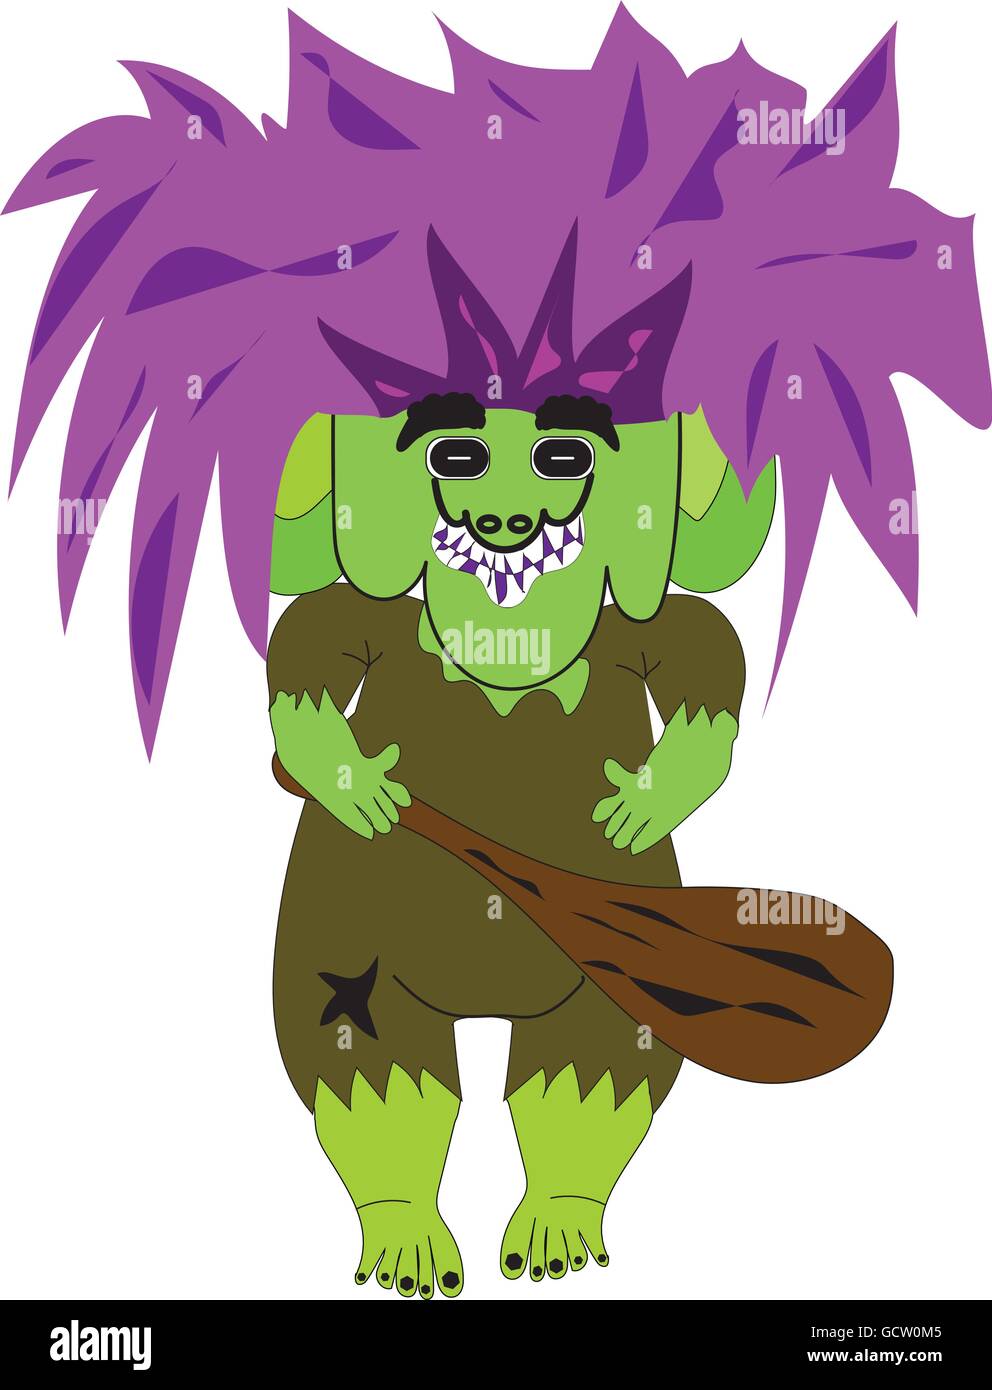 Illustrated mountain troll holding wooden club with purple hair. Stock Vector